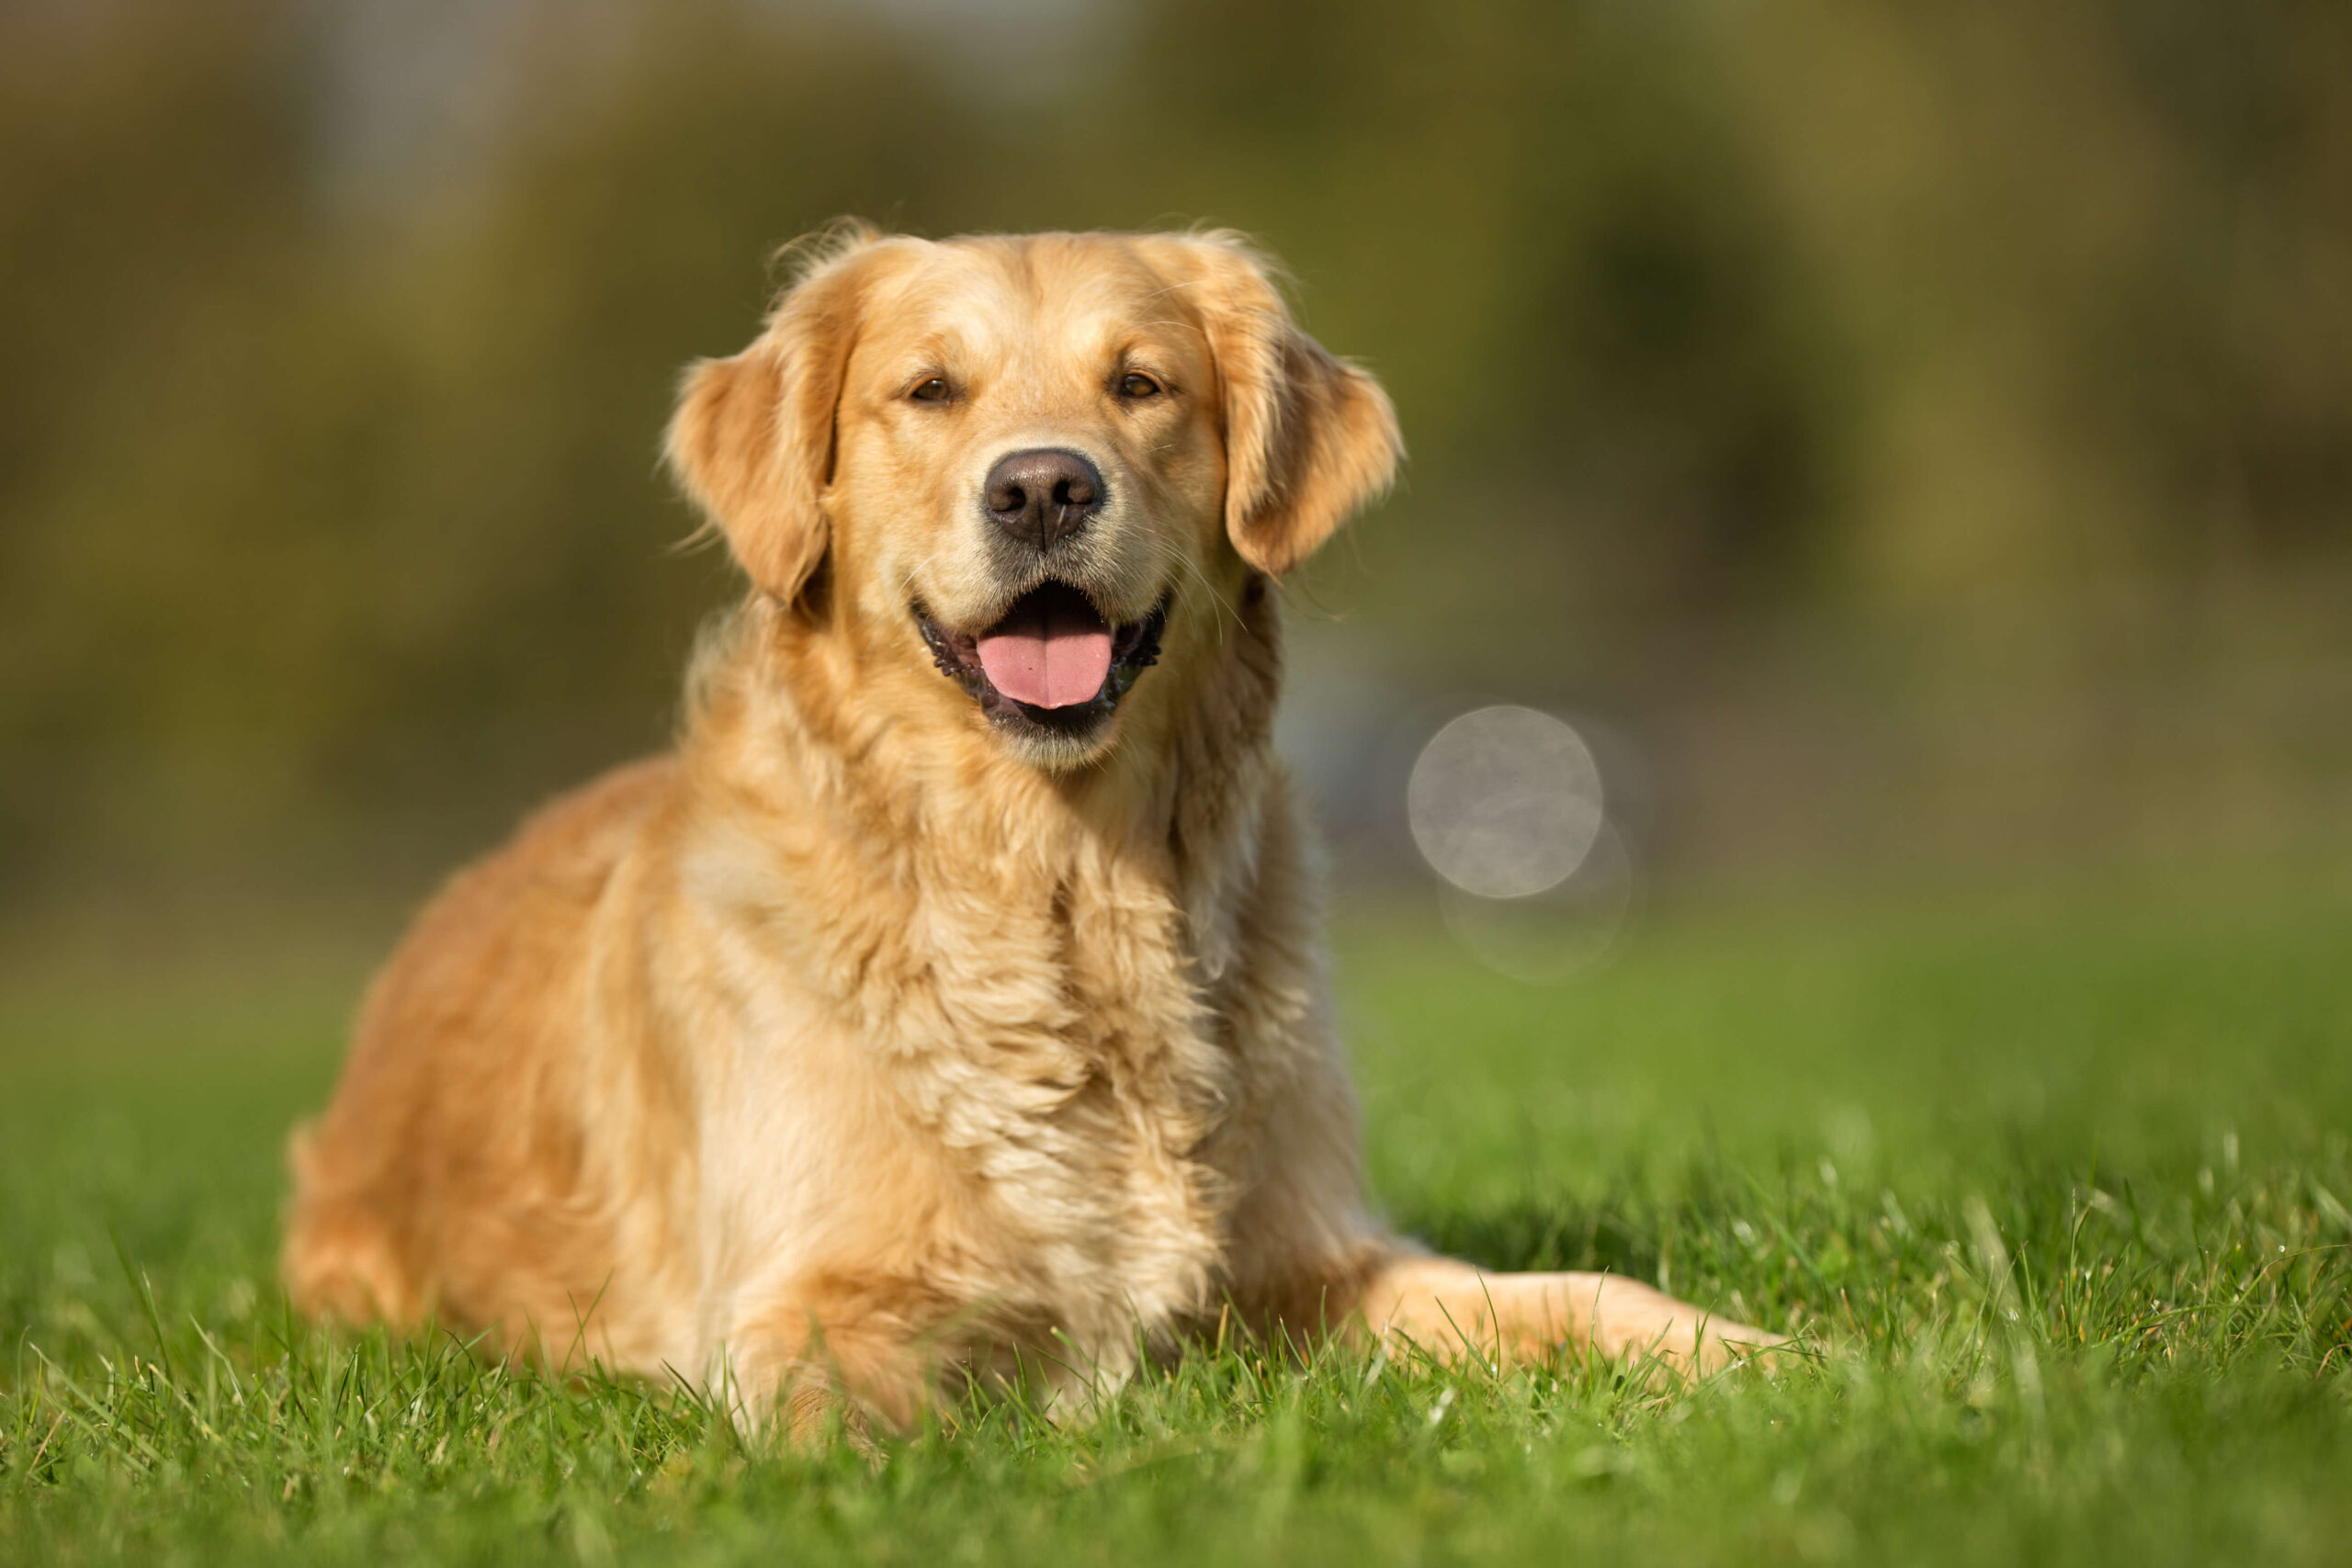 Dog relating in the sunshine on this pet friendly holiday in Ireland © Adobe Stock